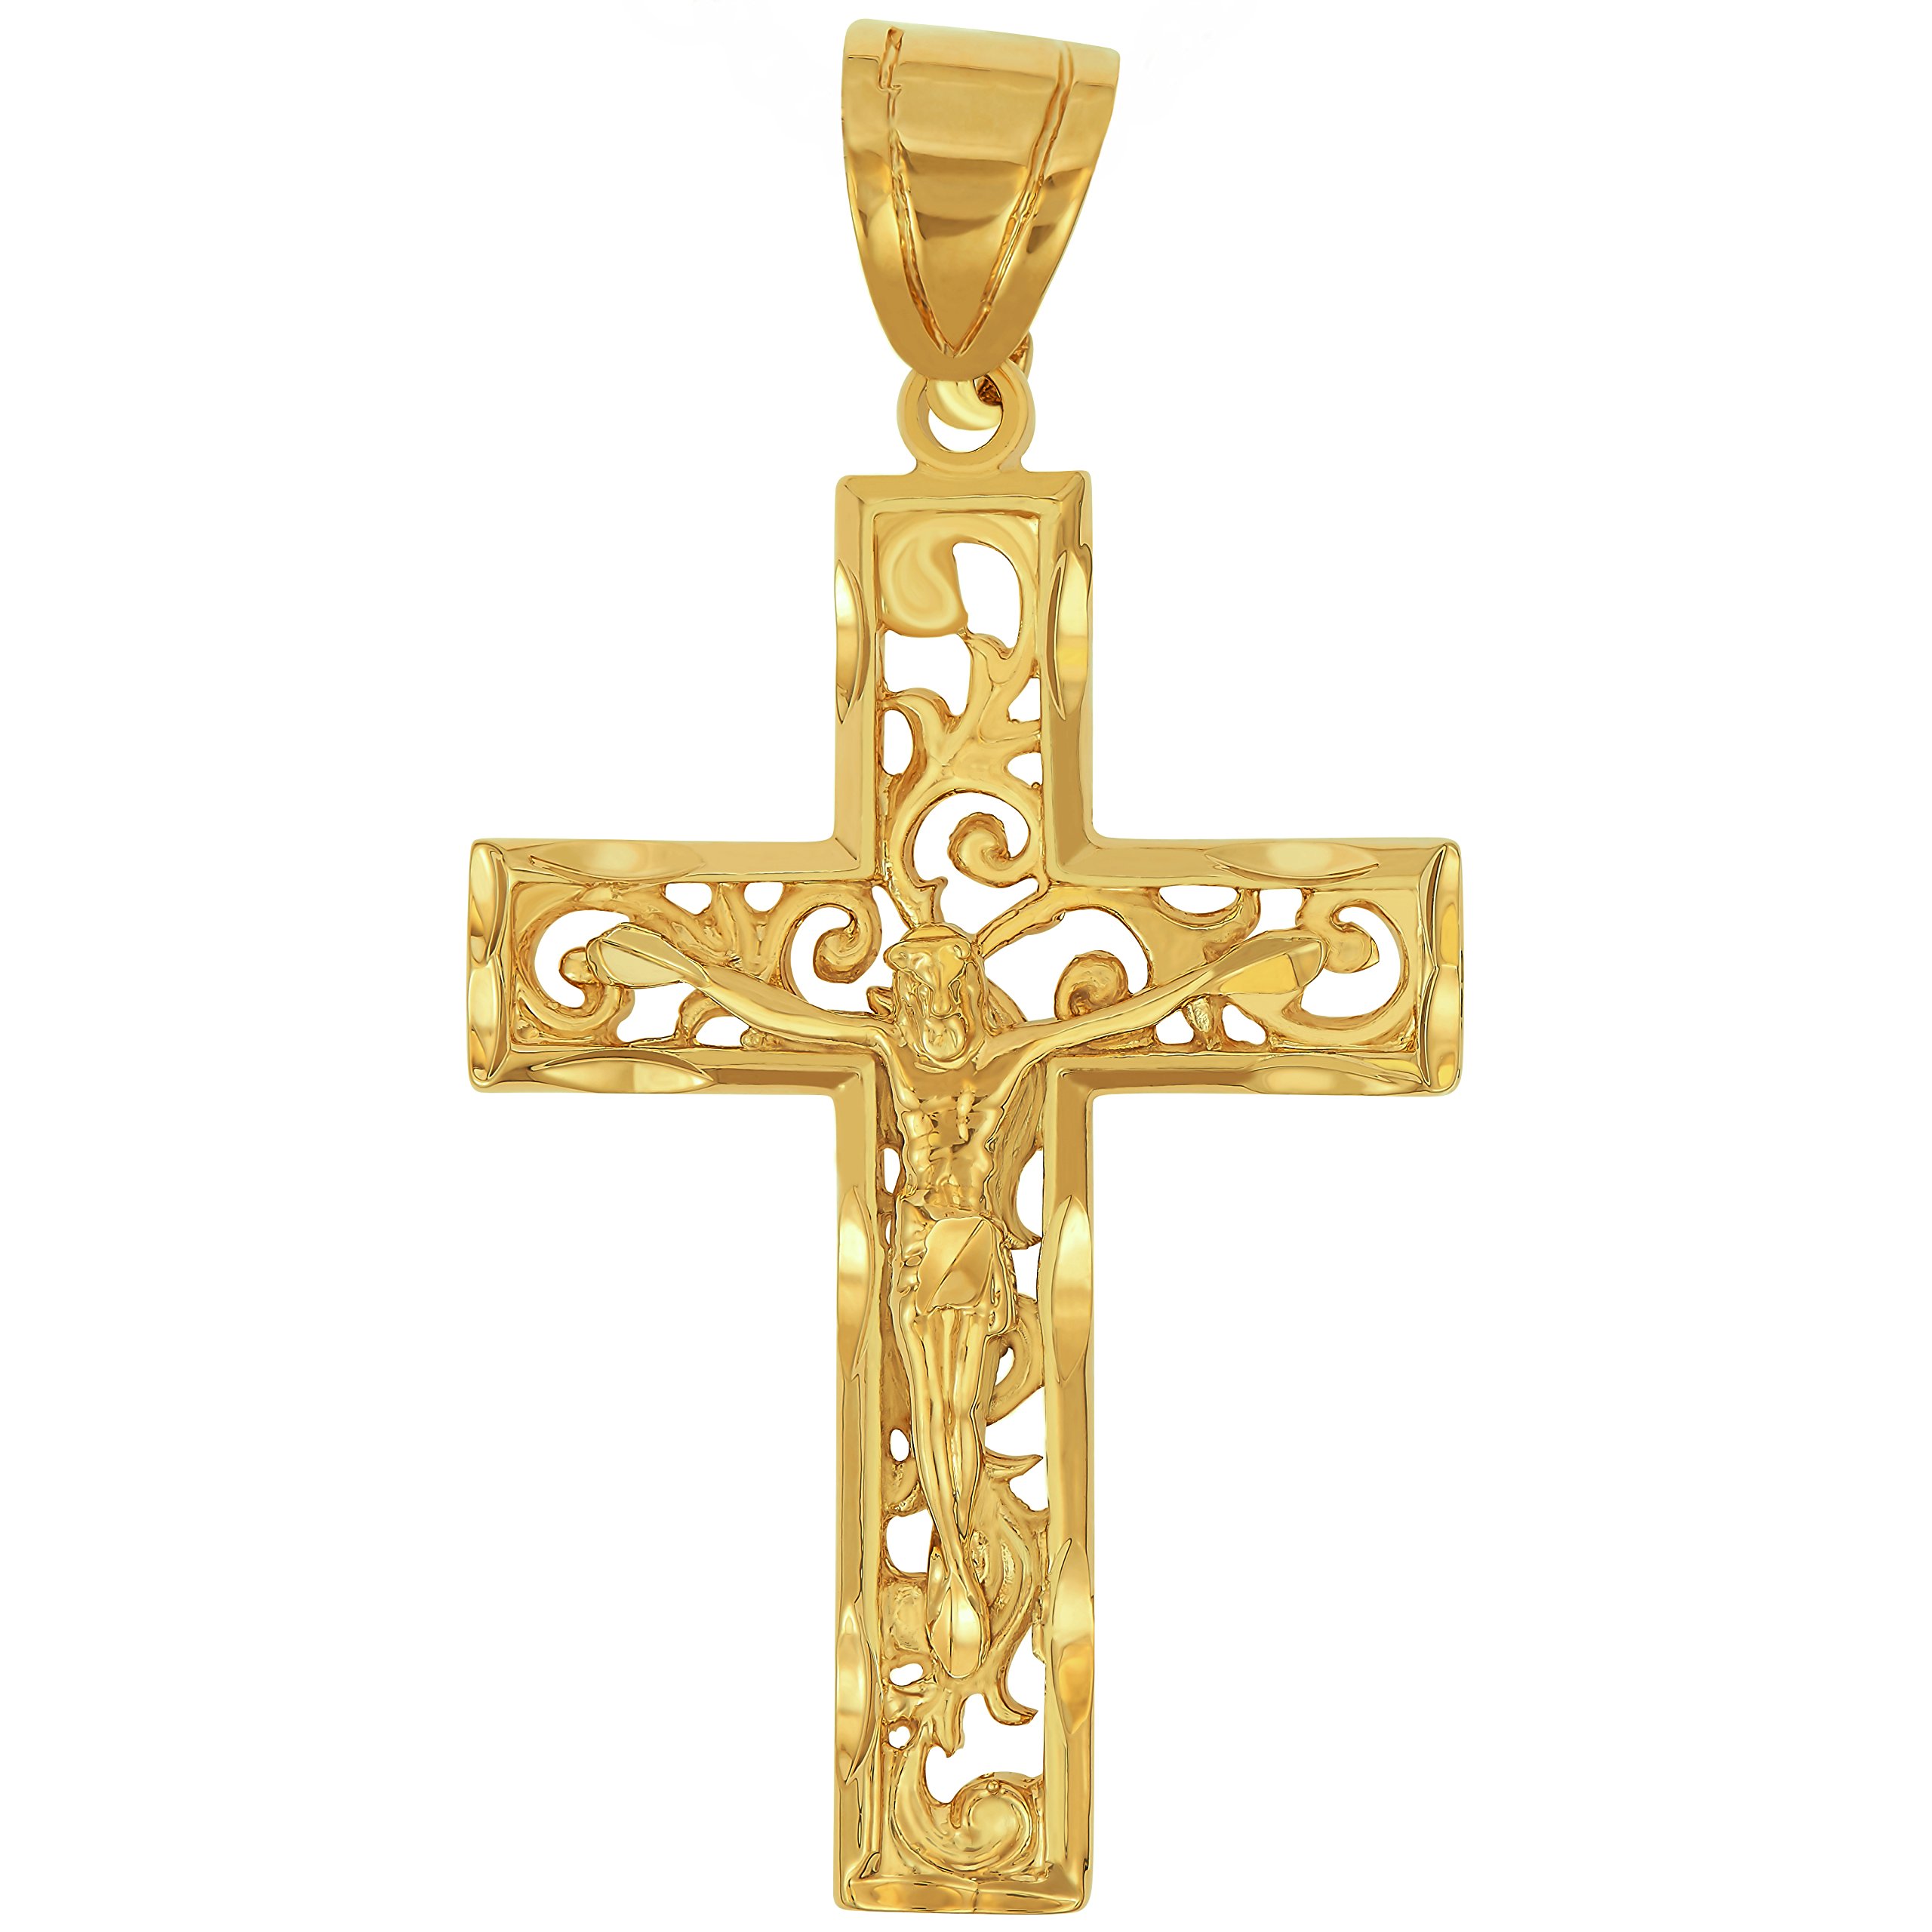 LIFETIME JEWELRY Large Filigree Crucifix Cross Necklace for Men & Women 24k Gold Plated